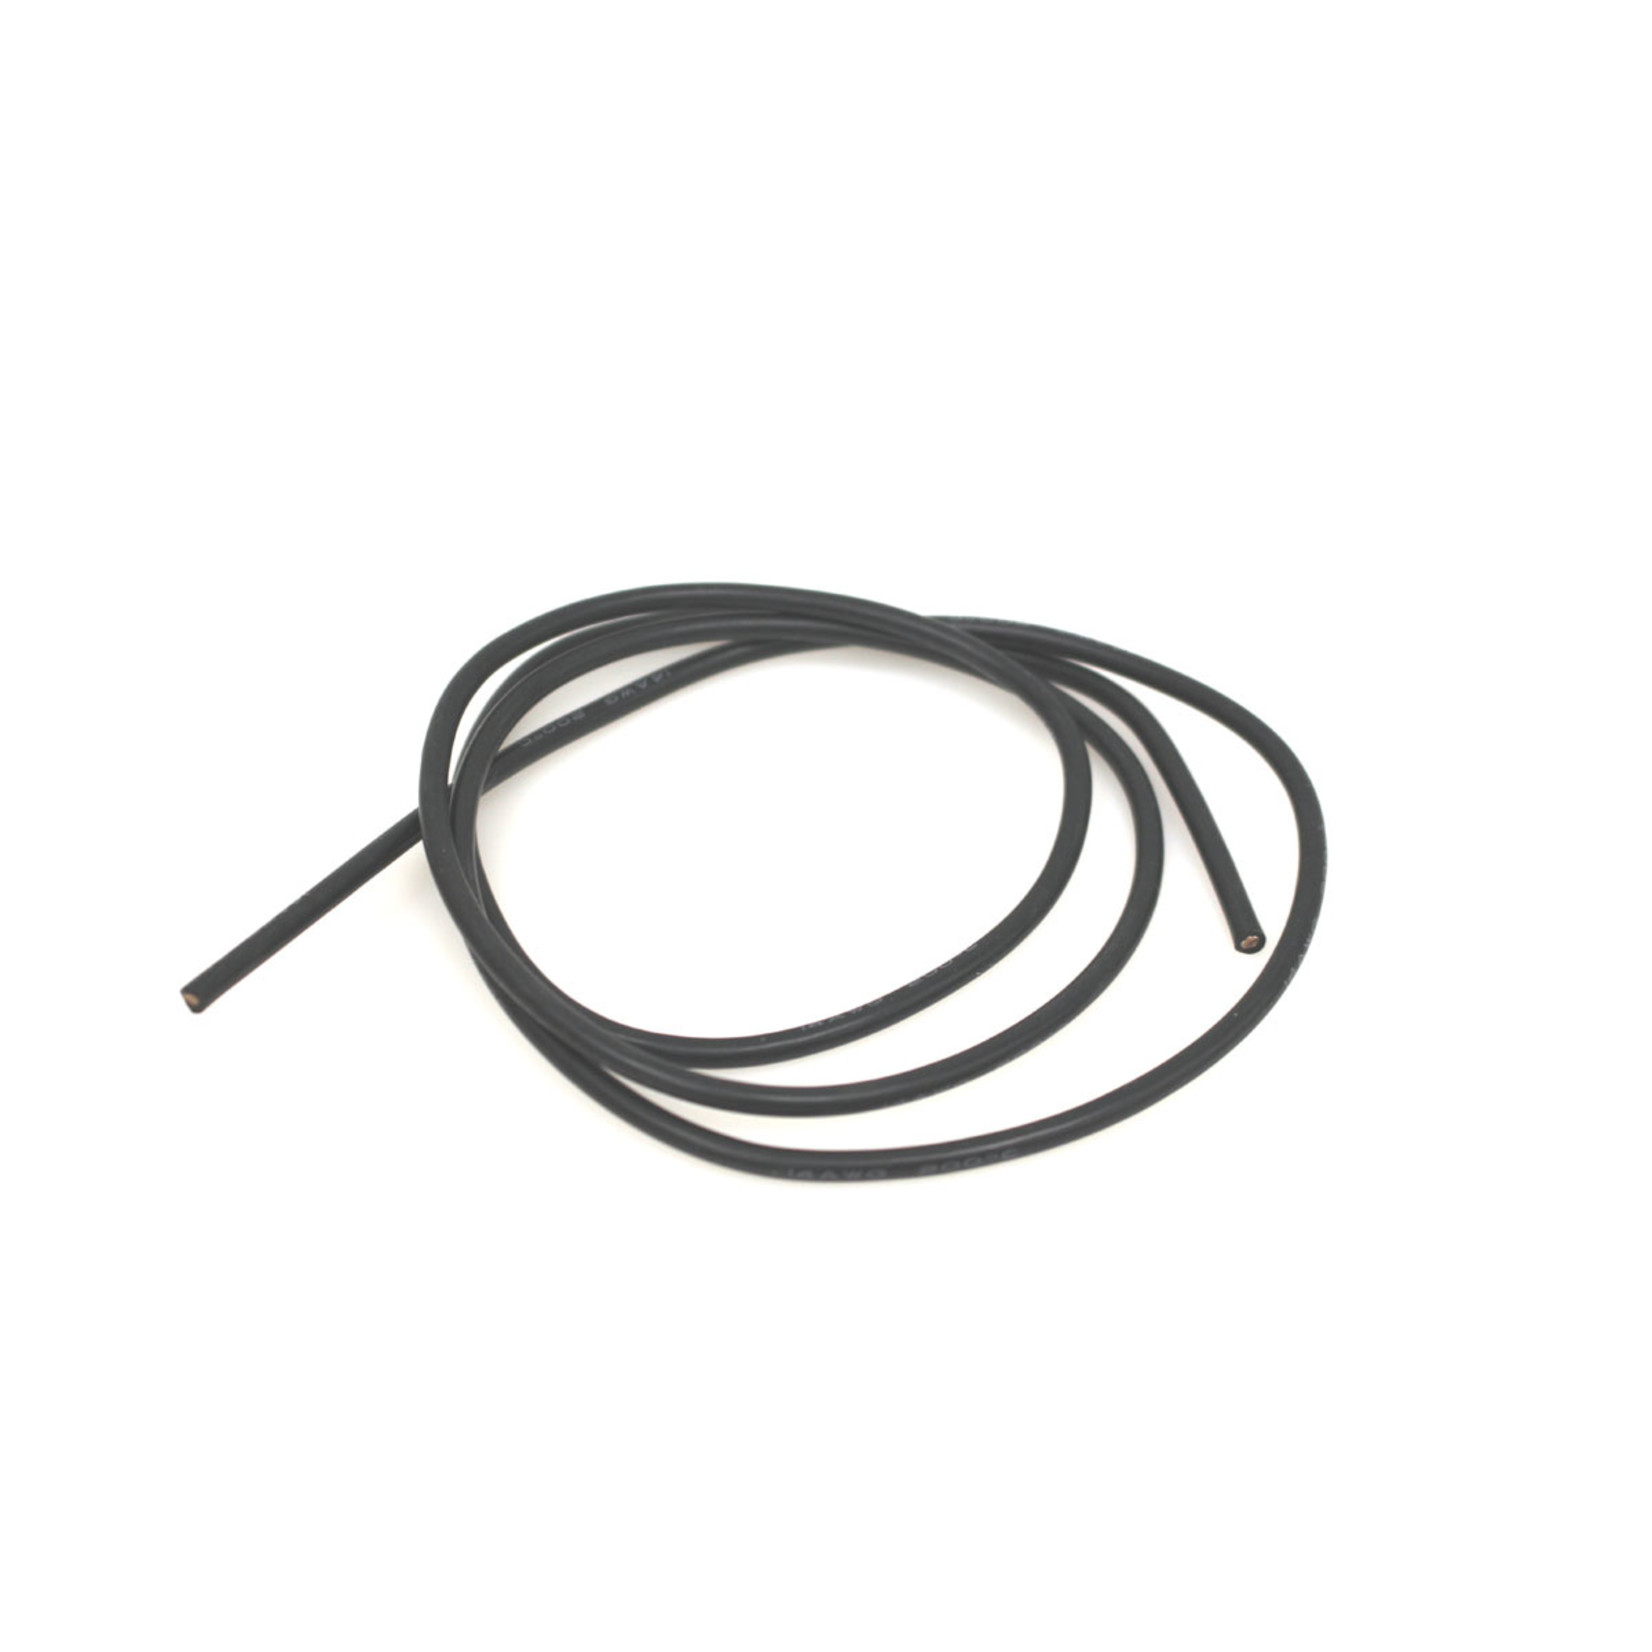 Racers Edge RCE1216 - 14 Gauge Silicone Wire, 3' Black